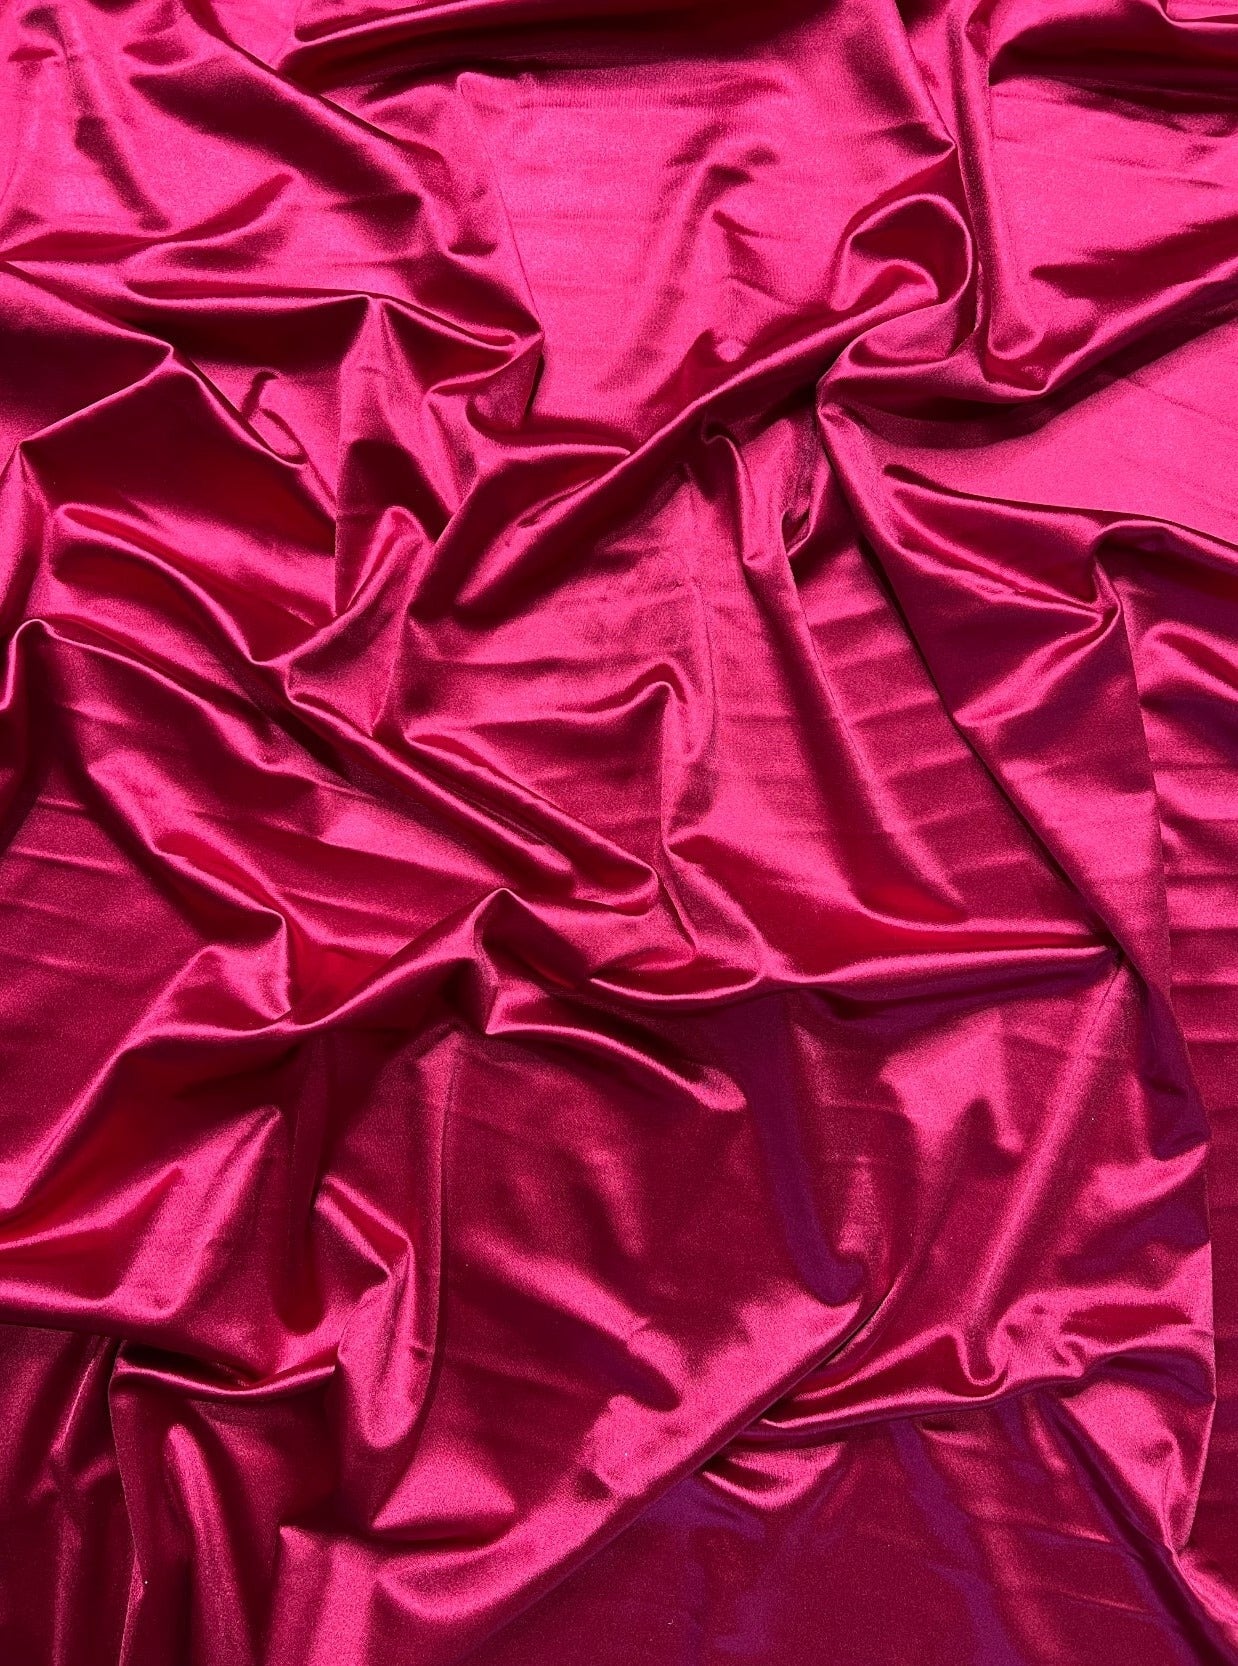 wine nylon spandex, wine red spandex, hot pink nylon spandex, pink fabric online, kiki textiles, fabric for leggings, wholesale fabric USA, shiny fabric, solid legging fabric, fabric for crafts, fabric for clothes, fabric for dress